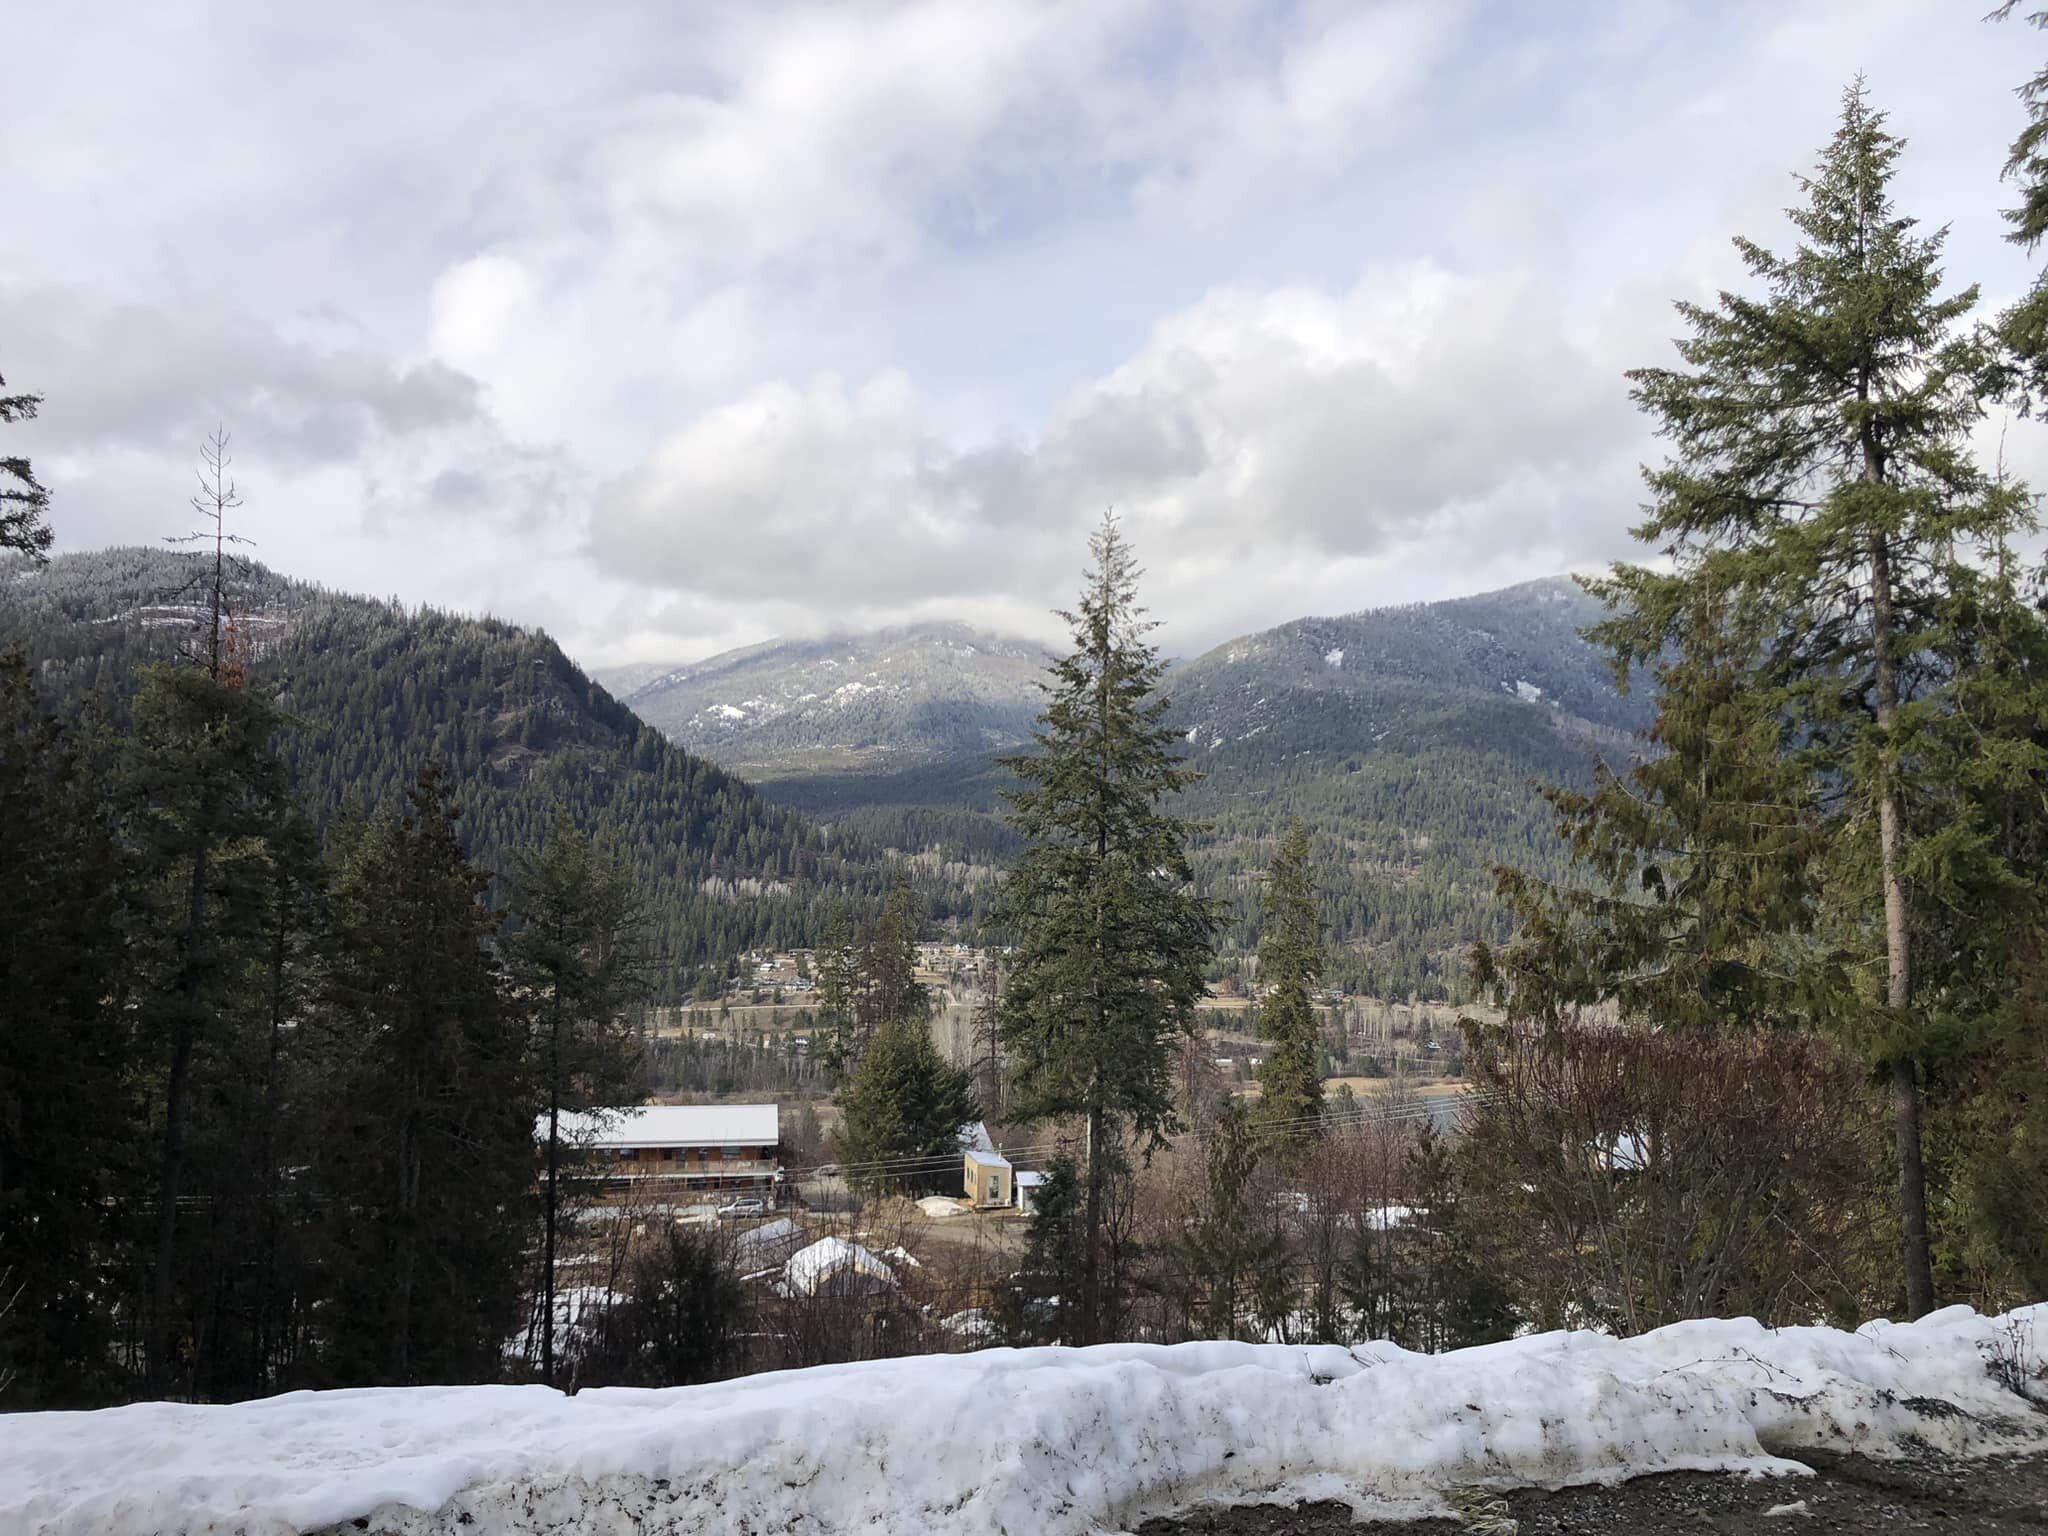 The view from our front door for the next month and a bit. Back in the Kootenays, hopefully the snow will be leaving soon.